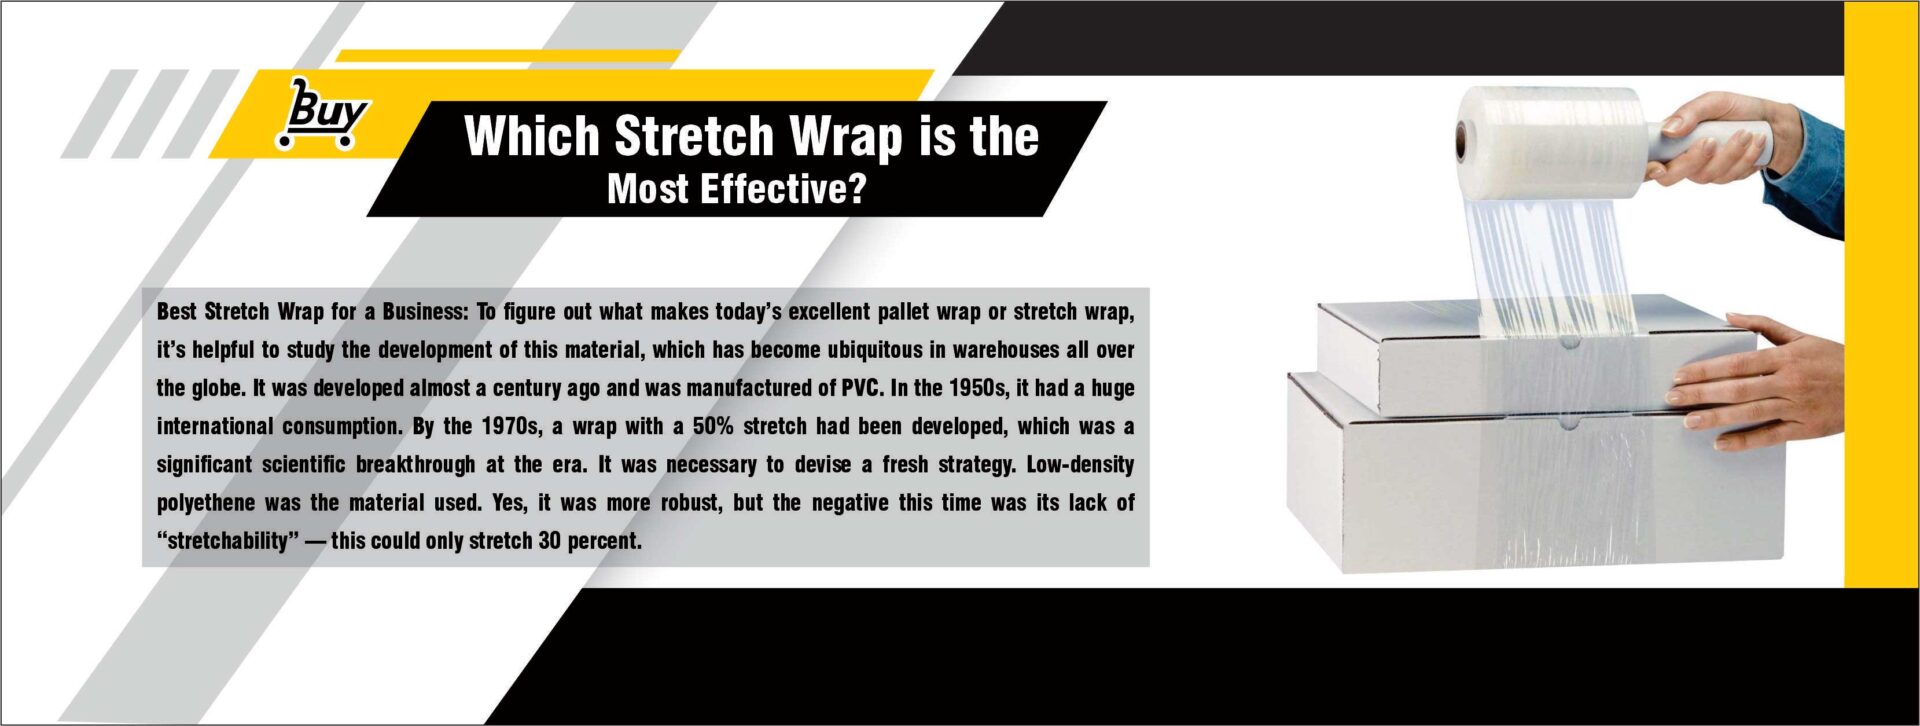 Stretch Wrap Usage & Buying Guide